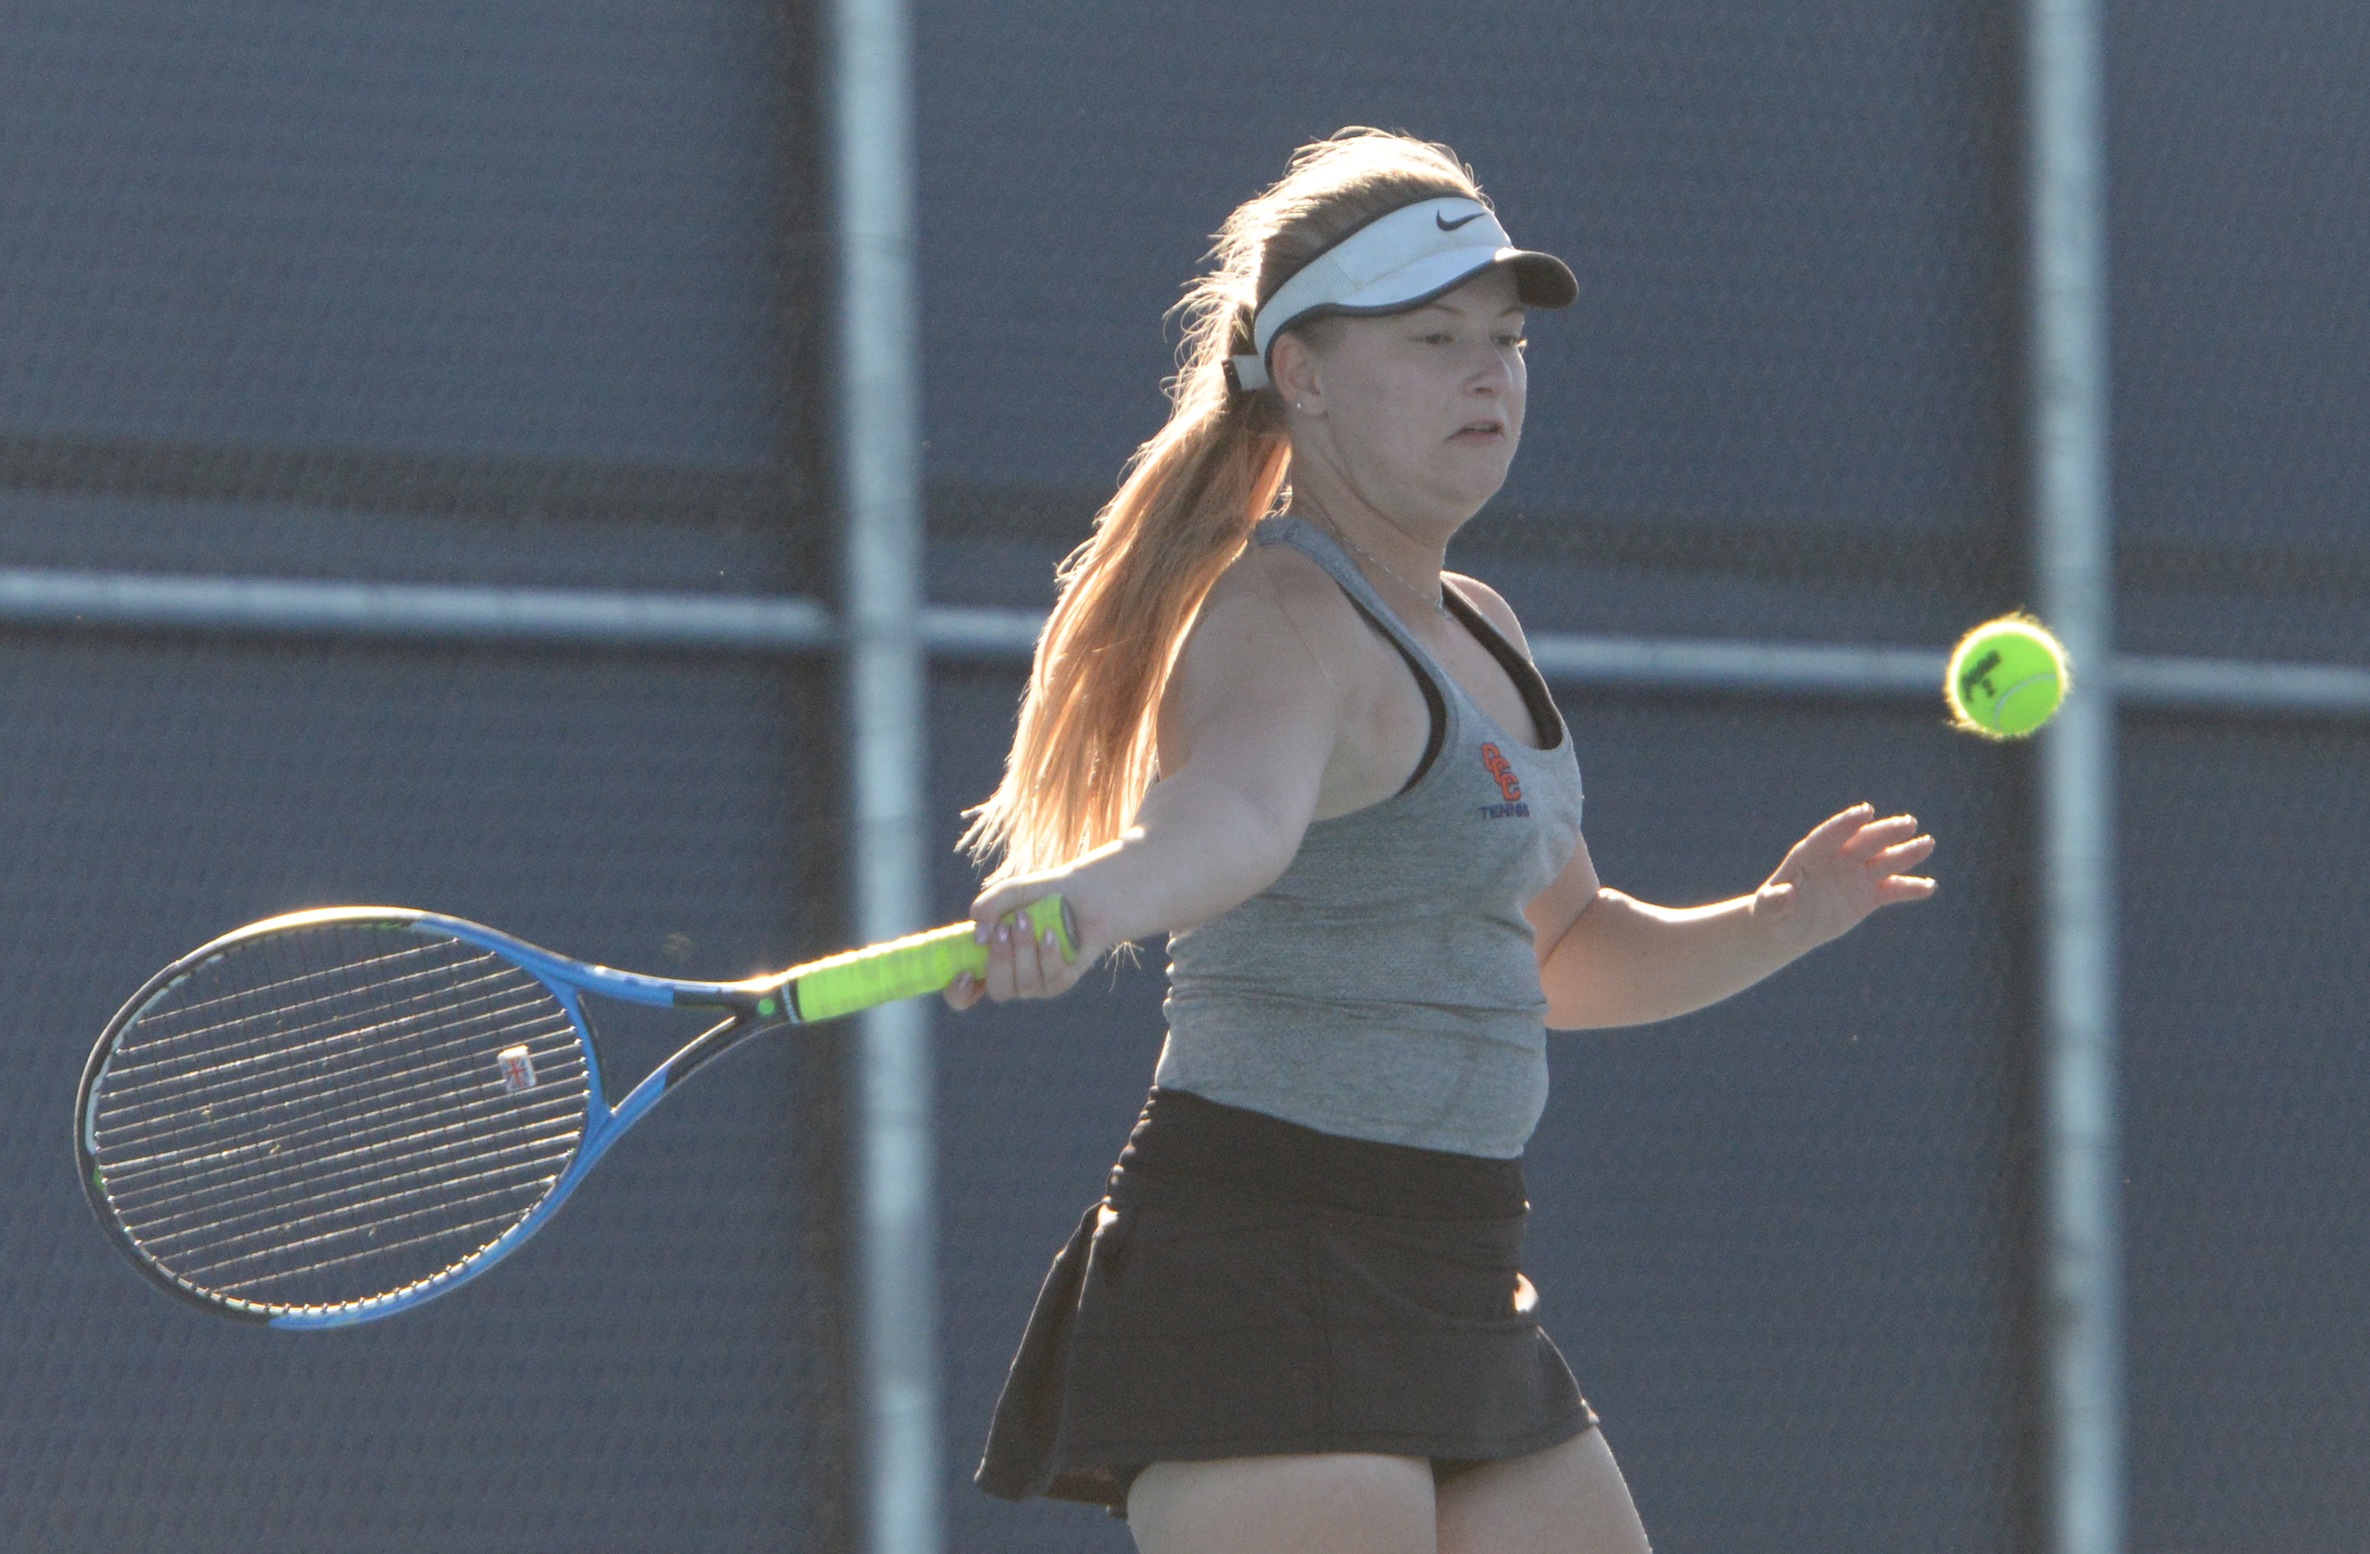 Pirate tennis continues to roll